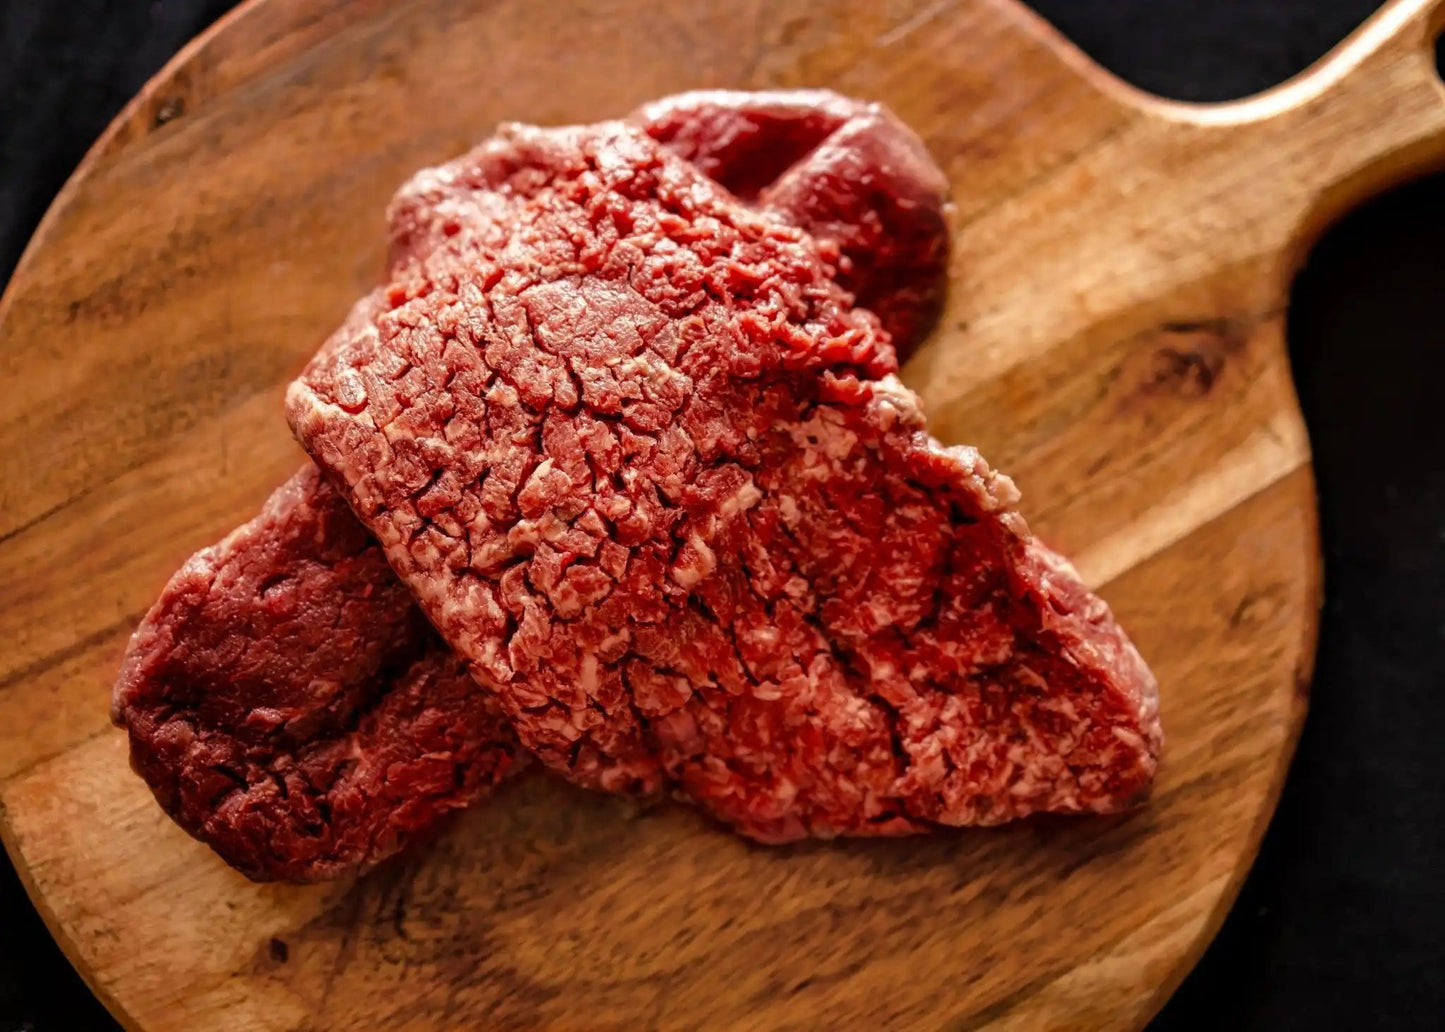 100% All-Natural Grass-Fed Pasture-Raised Wagyu Cube Steak - The Hufeisen-Ranch (WYO Wagyu)